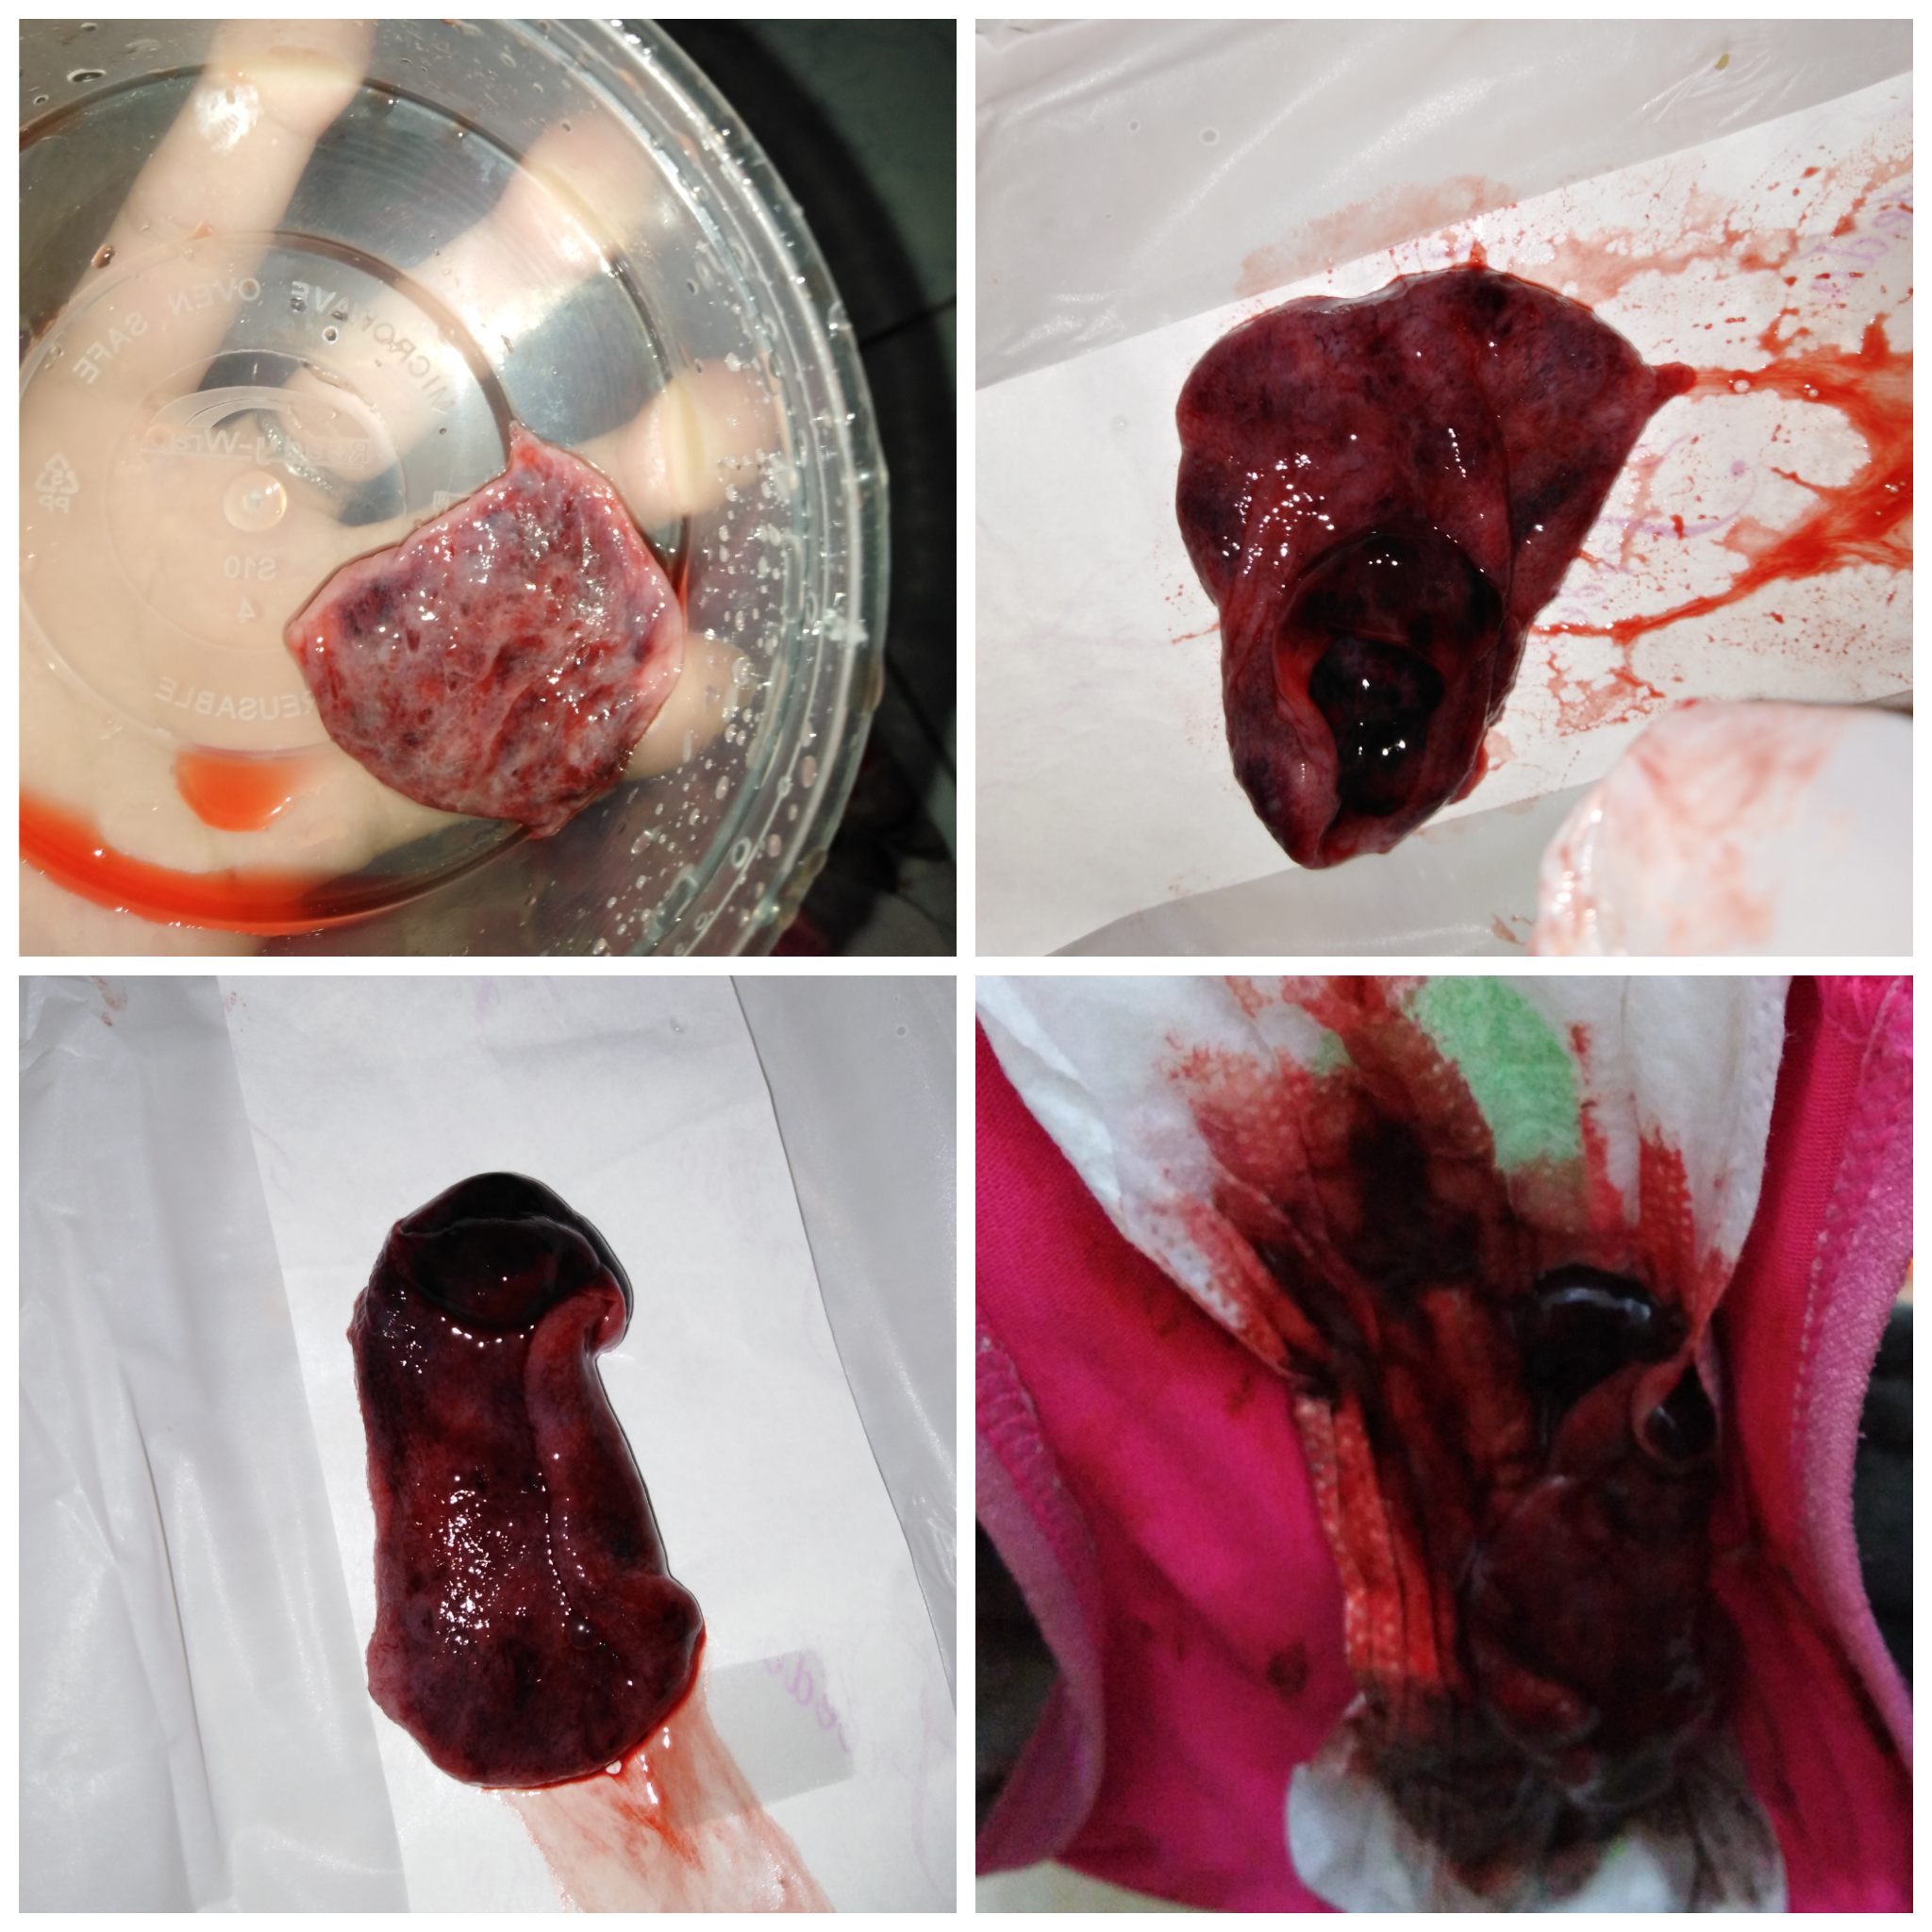 *GRAPHIC IMAGE* Is this implantation bleeding or miscarriage?